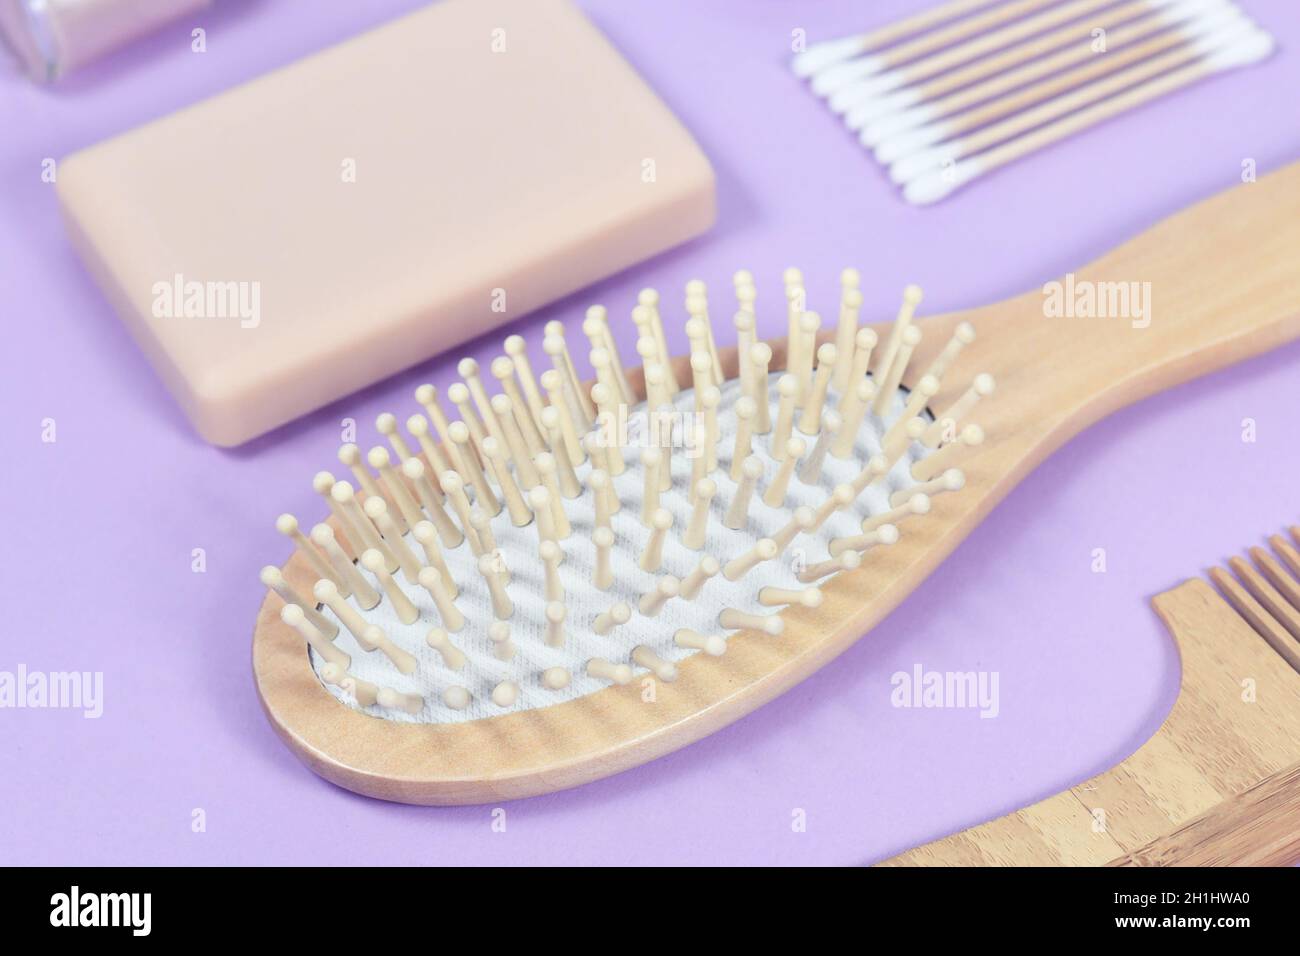 Wooden eco friendly hair brush on violet background Stock Photo